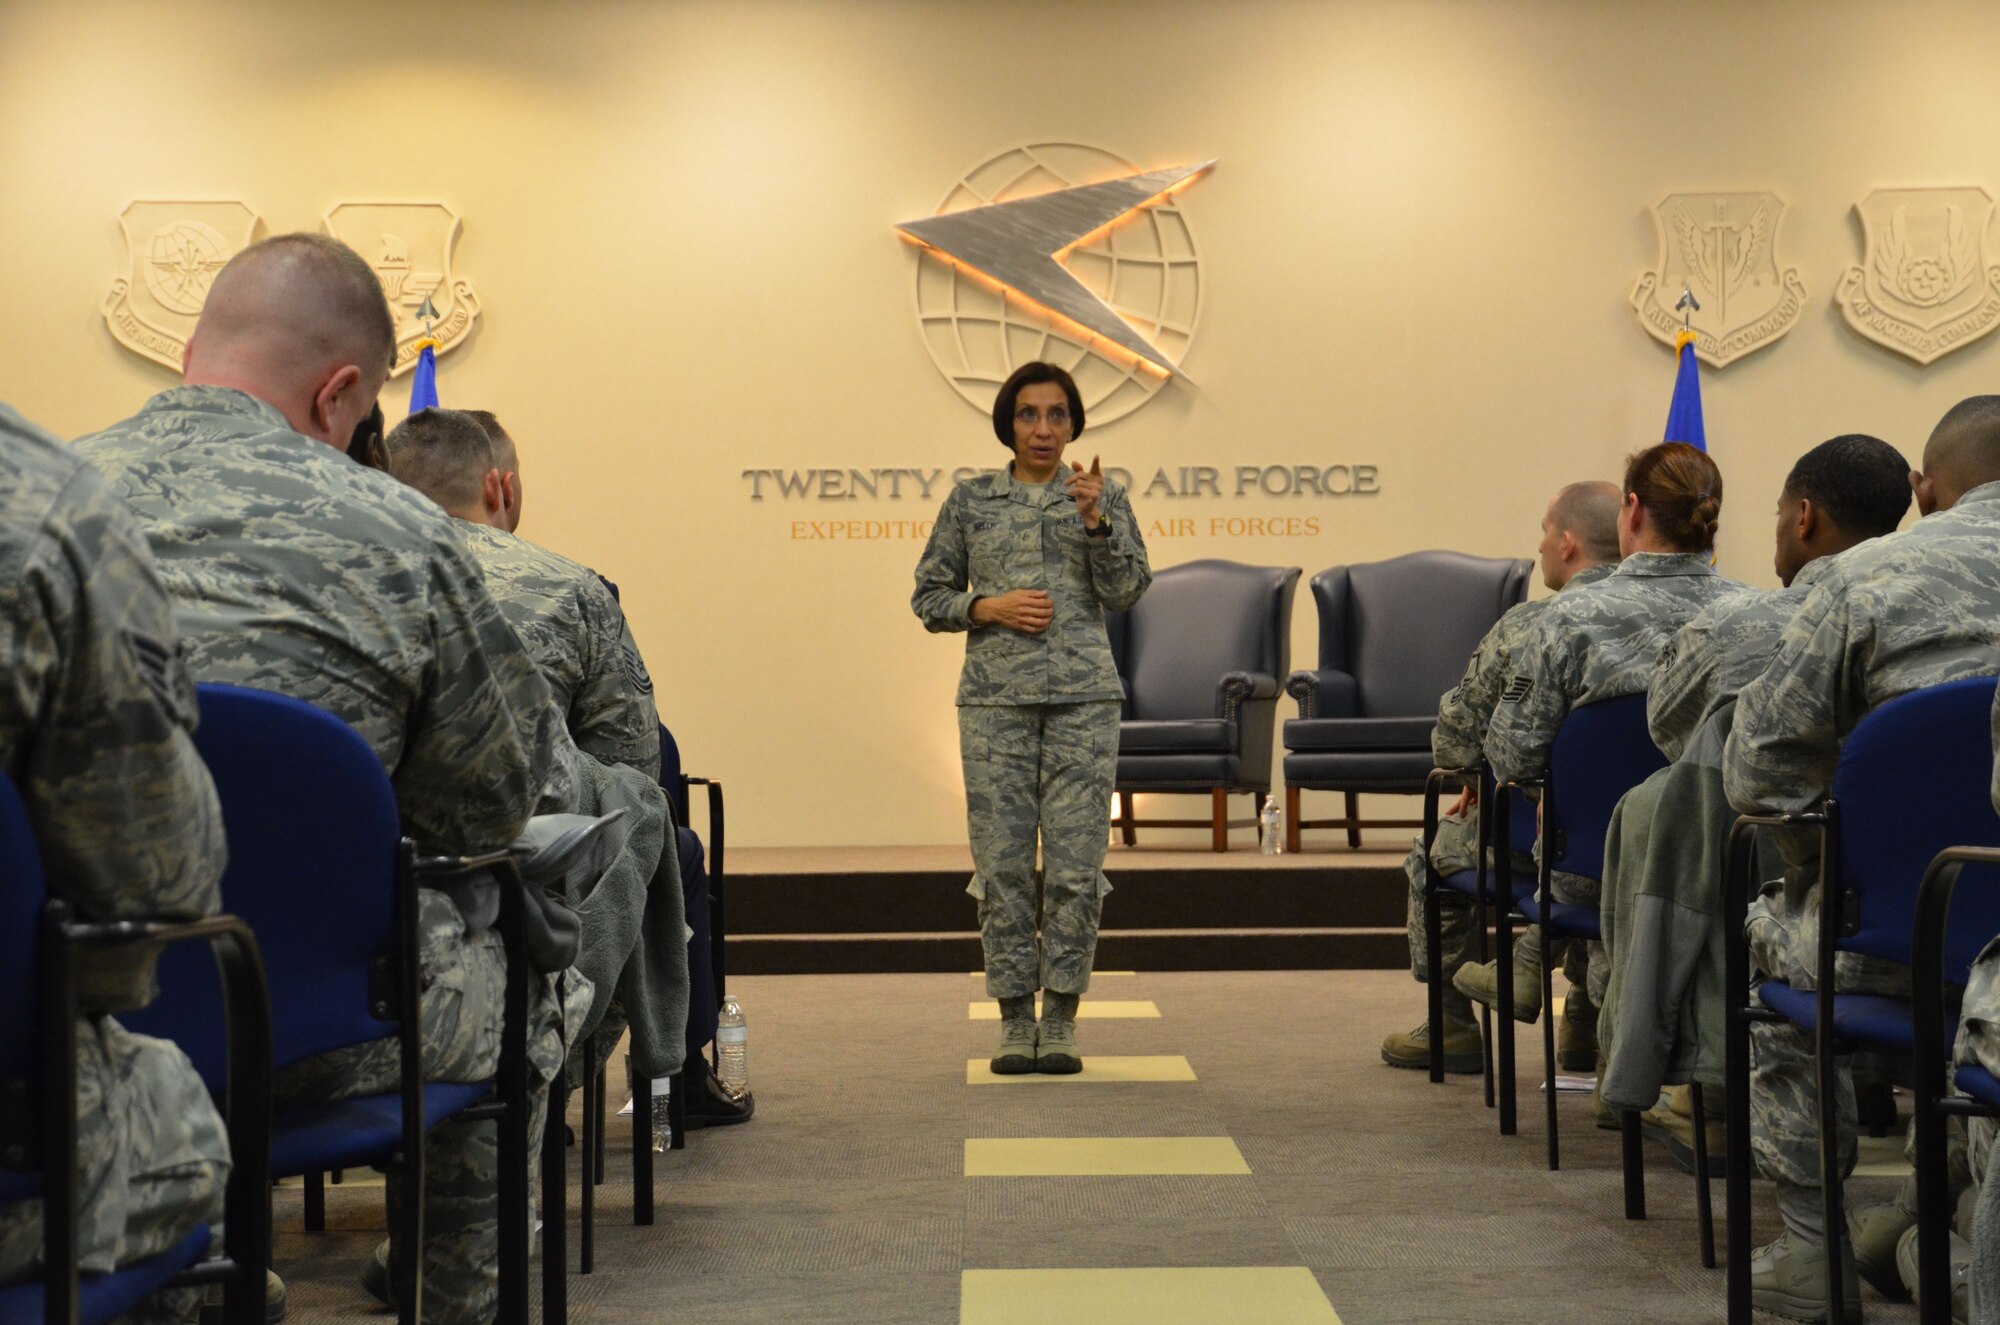 Chief Master Sgt. Ericka Kelly, Air Force Reserve Command command chief master sergeant, speaks to a group of Airmen at Dobbins Air Reserve Base, Ga, Jan. 6, 2018. Kelly visited Dobbins to tour the base and visit the units, as well as host question and answer sessions. (U.S. Air Force photo by Senior Airman Lauren Douglas)